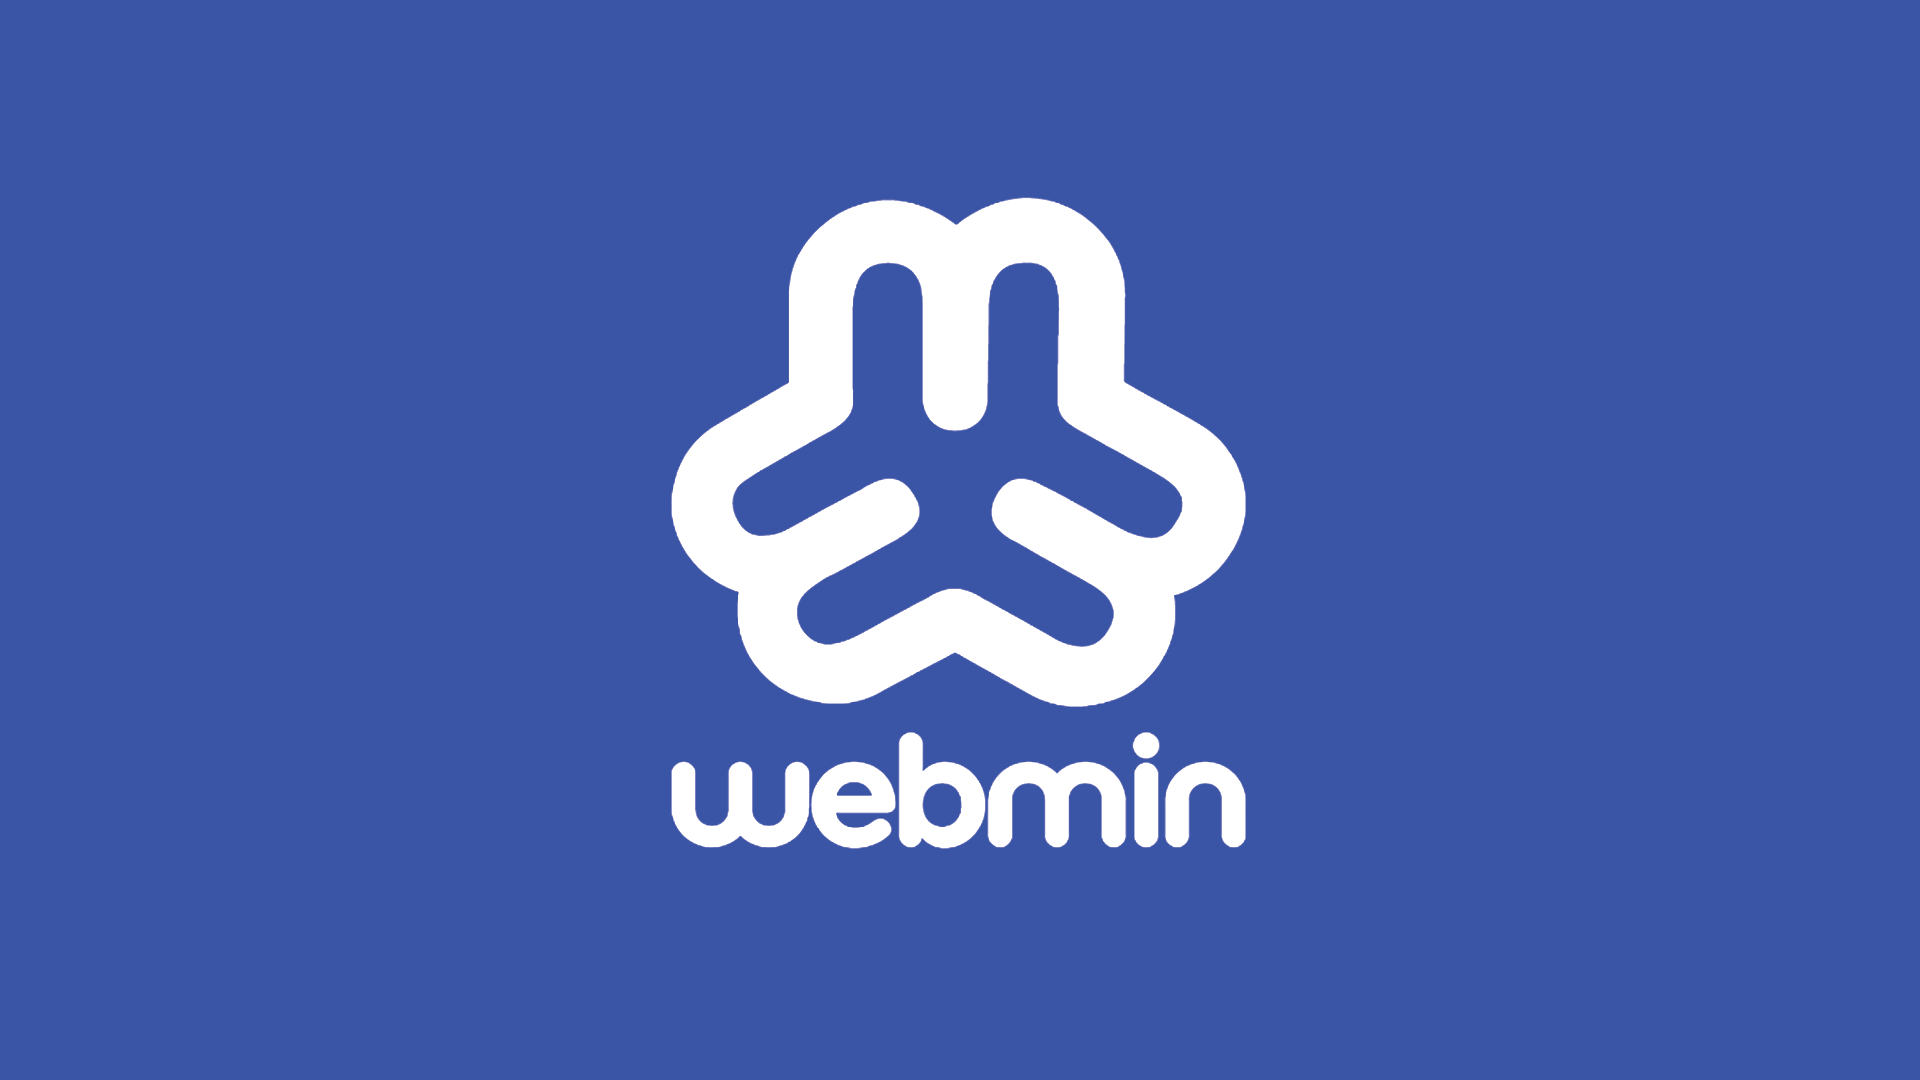 How to install WordPress on Webmin – Virtualmin and Usermin